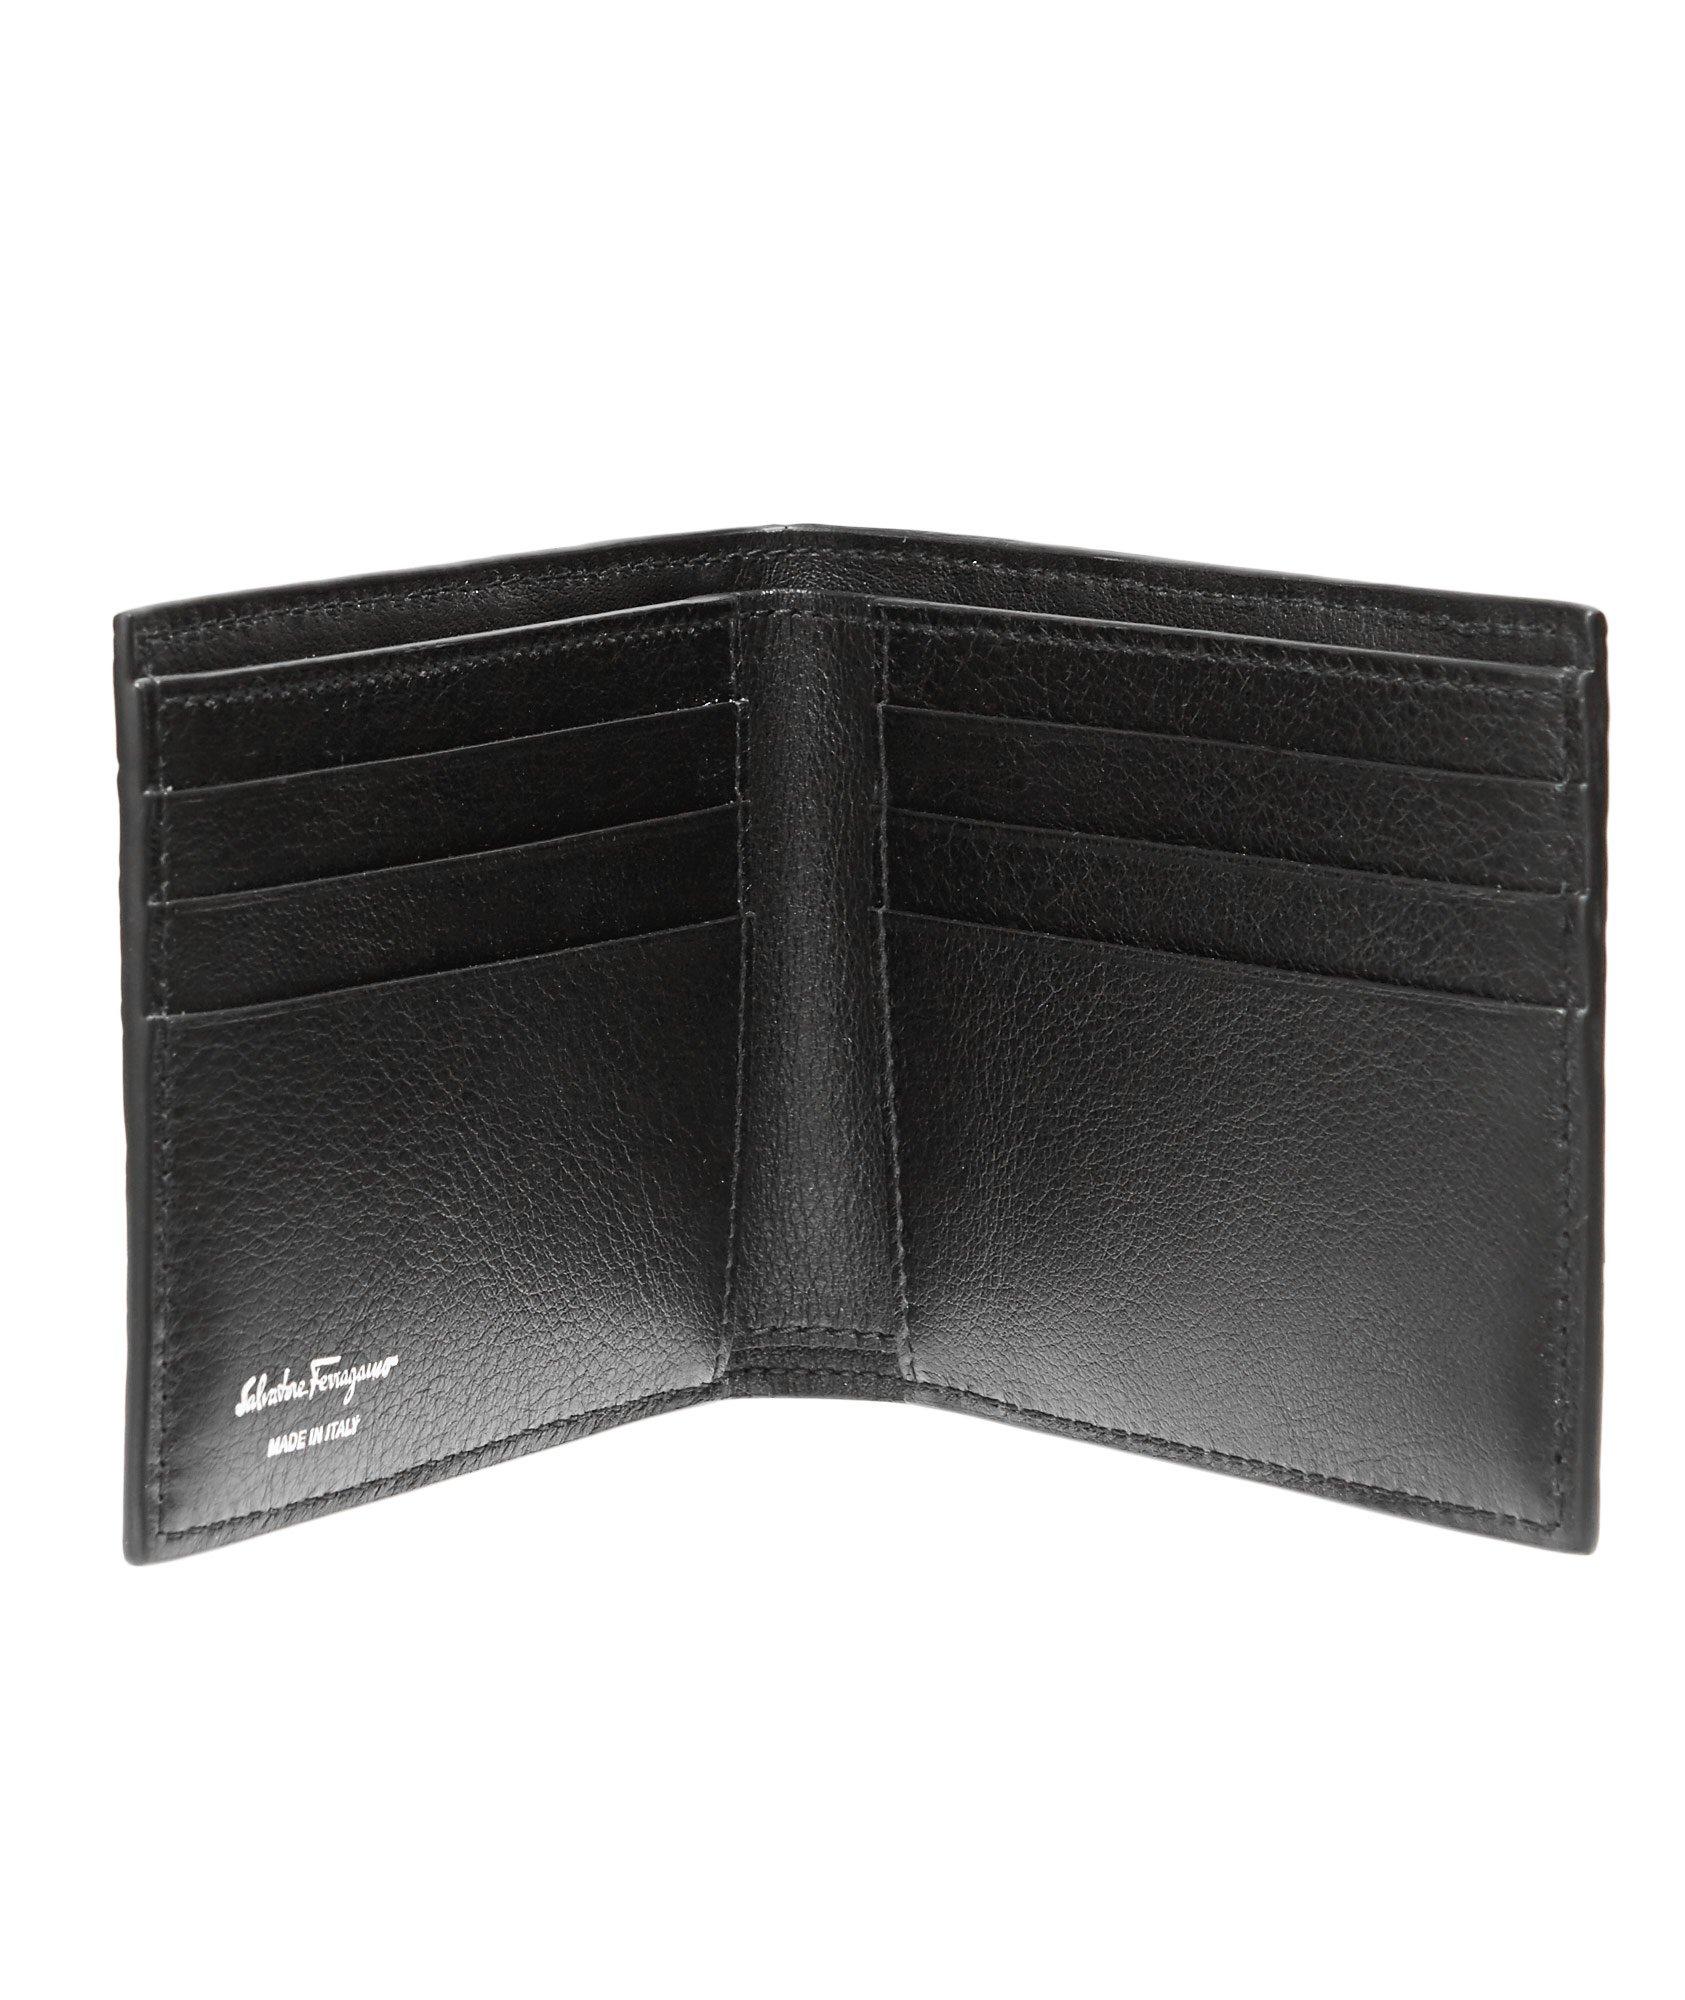 Textured Leather Wallet image 1